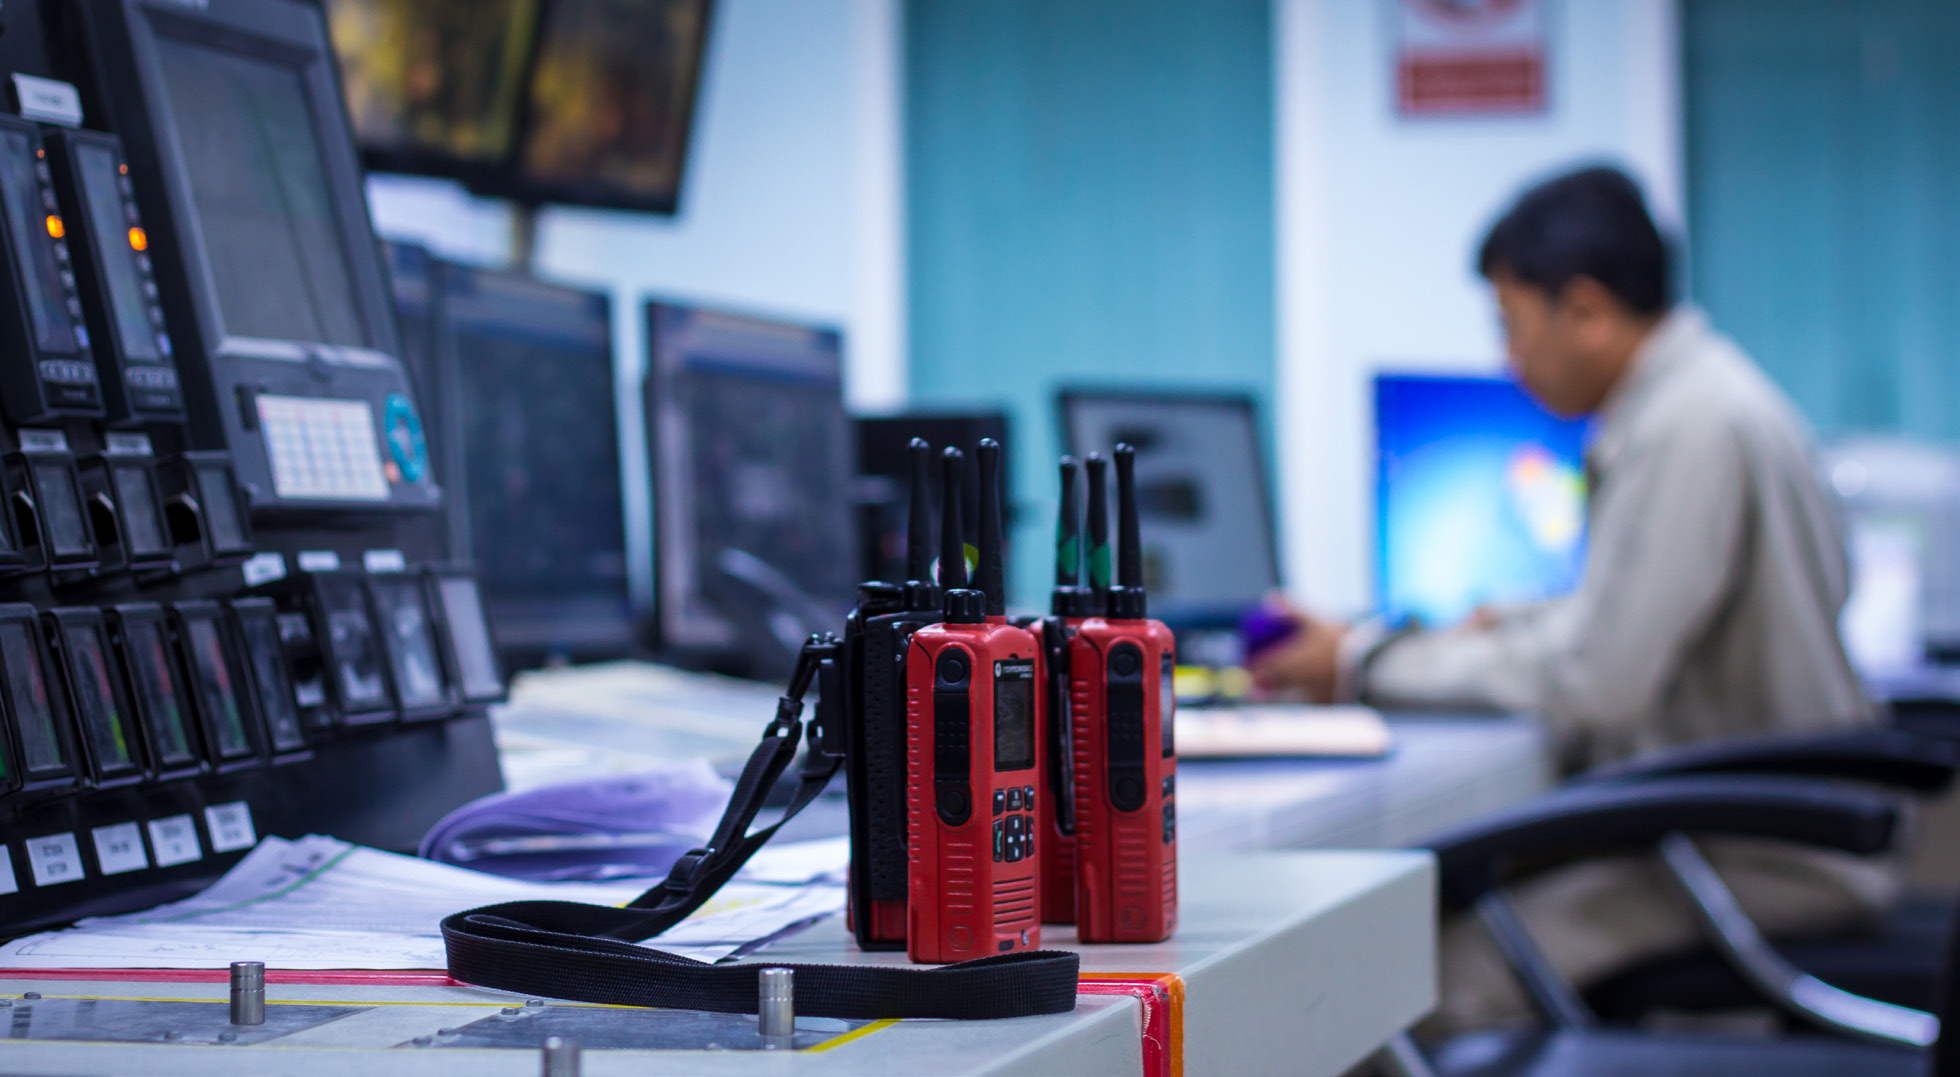 emergency response center with handheld radios in foreground